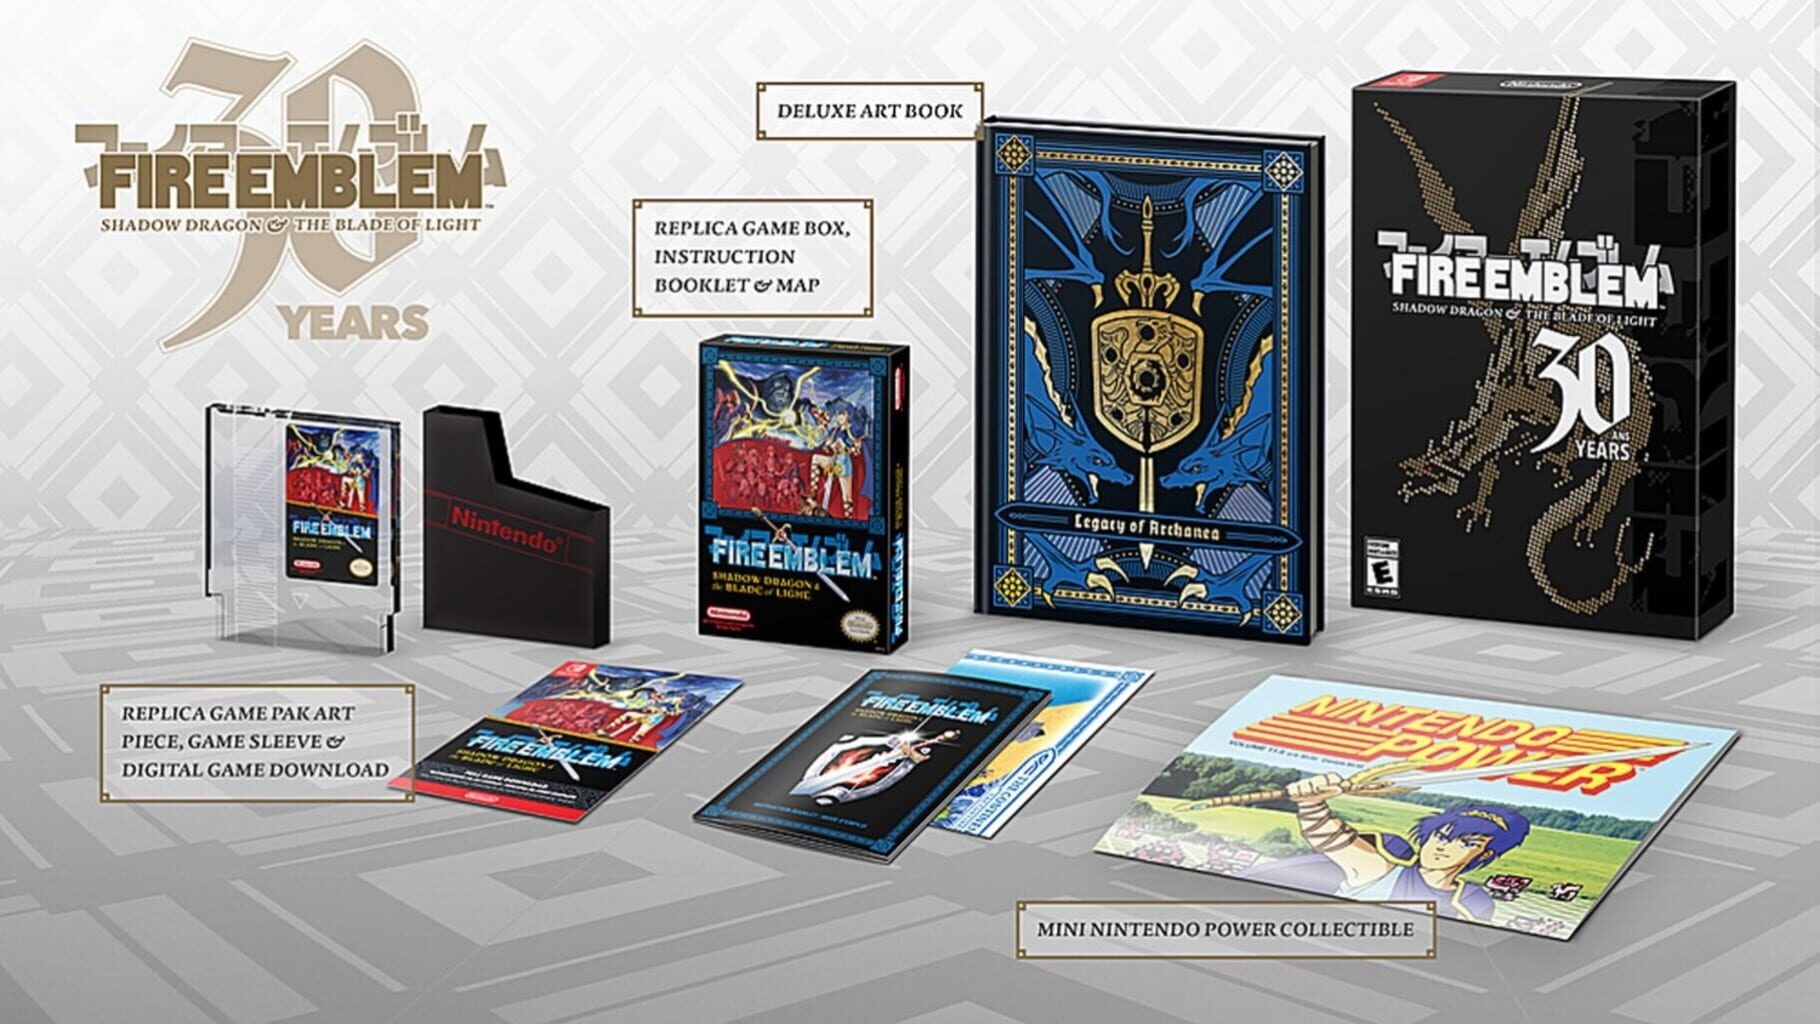 Fire Emblem: Shadow Dragon and the Blade of Light - 30th Anniversary Edition artwork